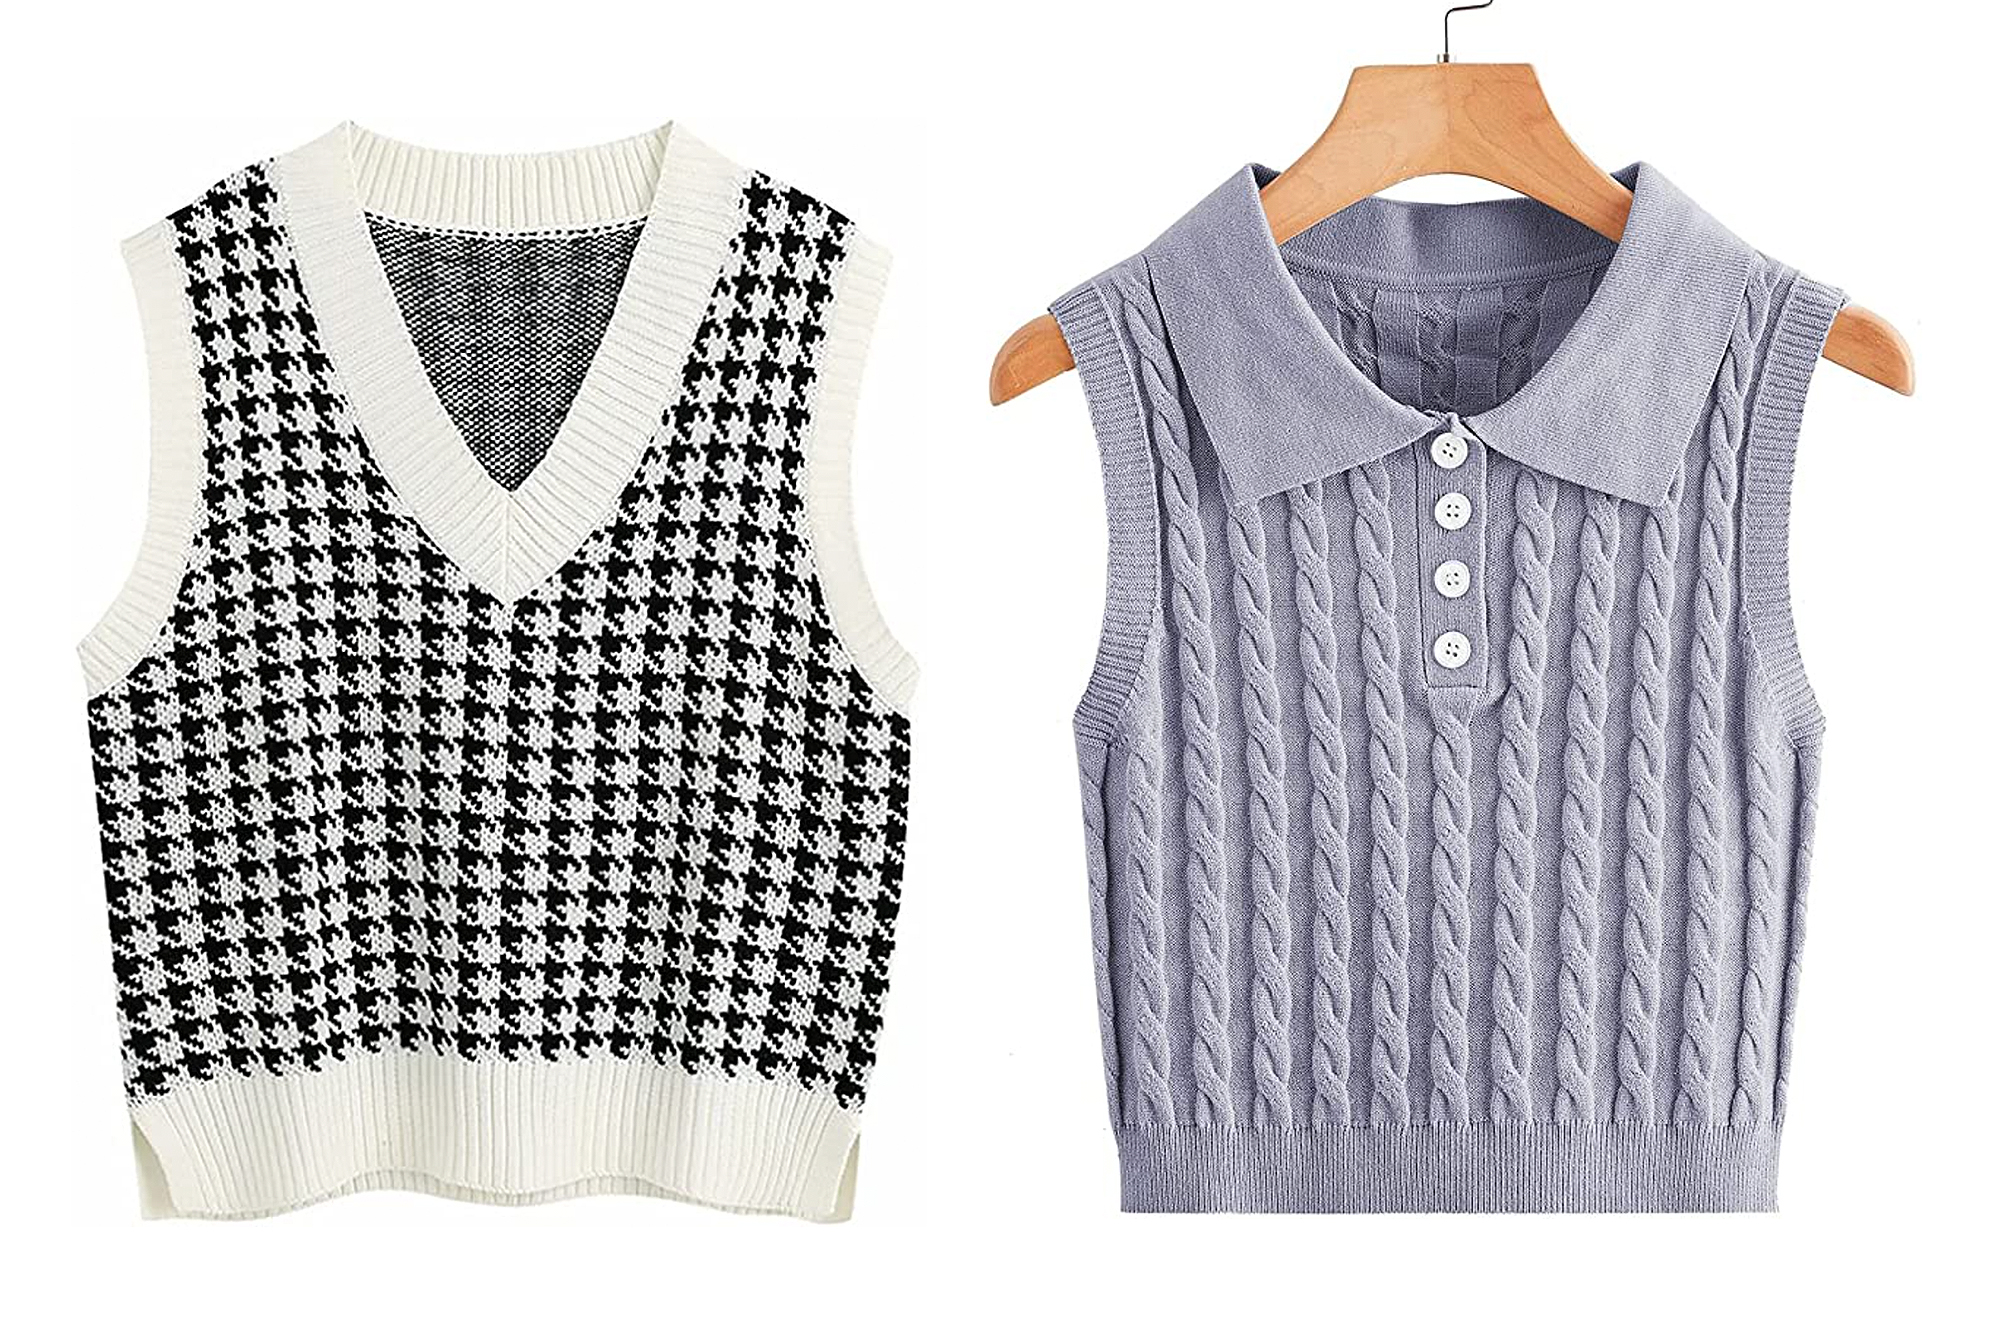 17 Knit Sweater Vests That You Can Wear and Style Year-Round